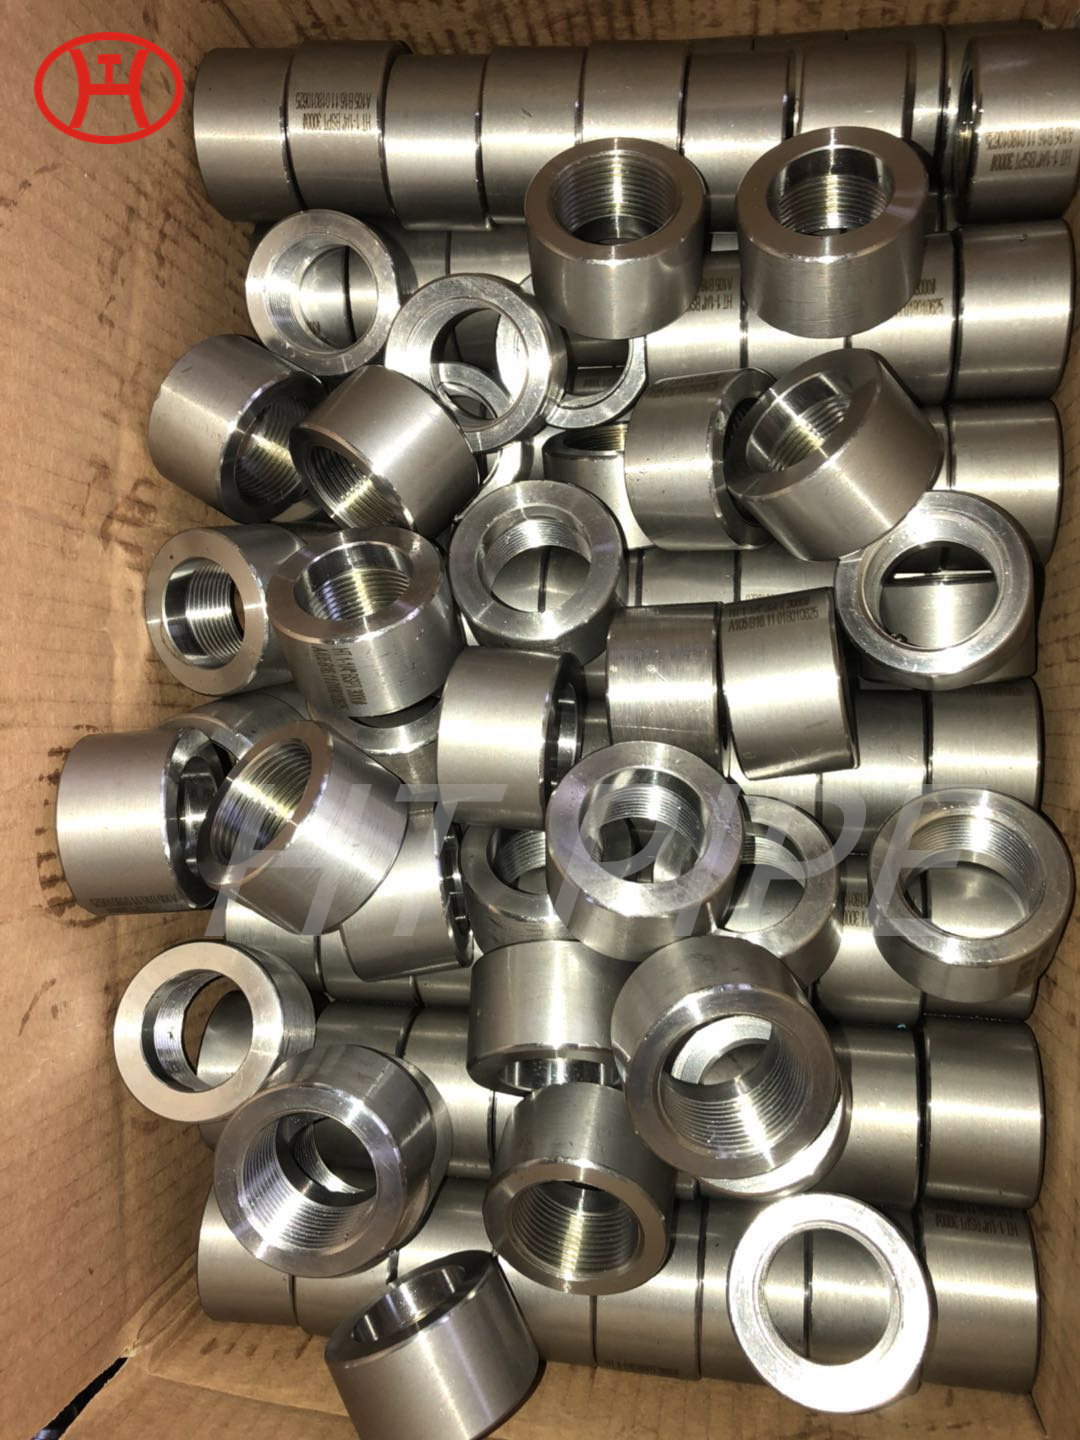 A105 coupling carbon steel pipe fittings weight exported to Malaysia